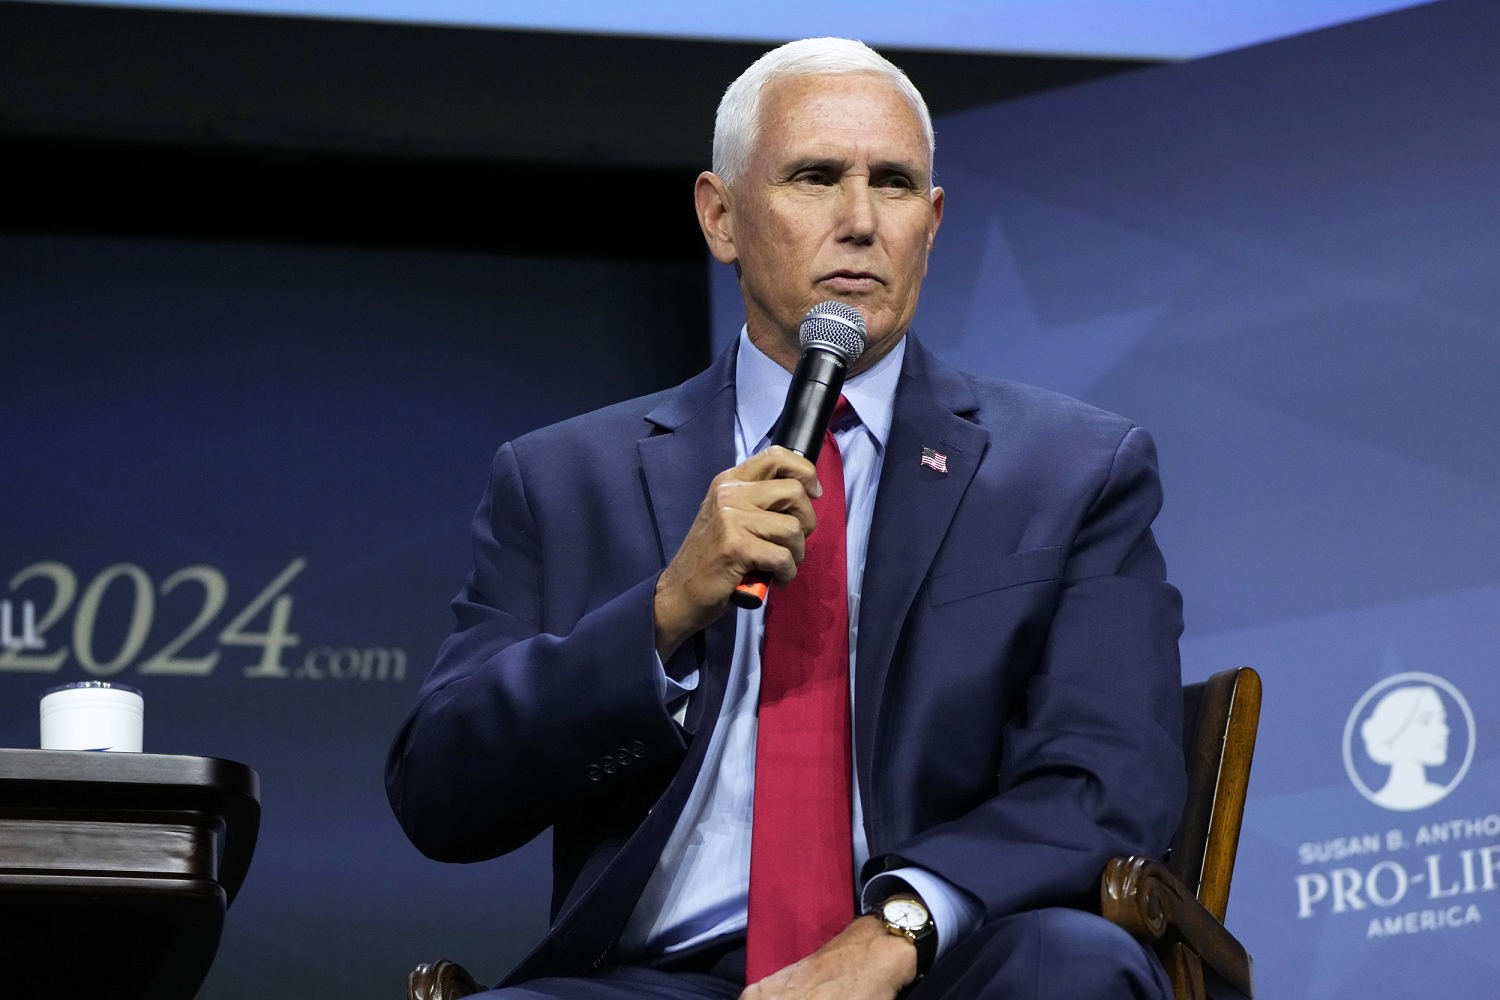 Mike Pence announces: ‘I will not be endorsing Donald Trump’